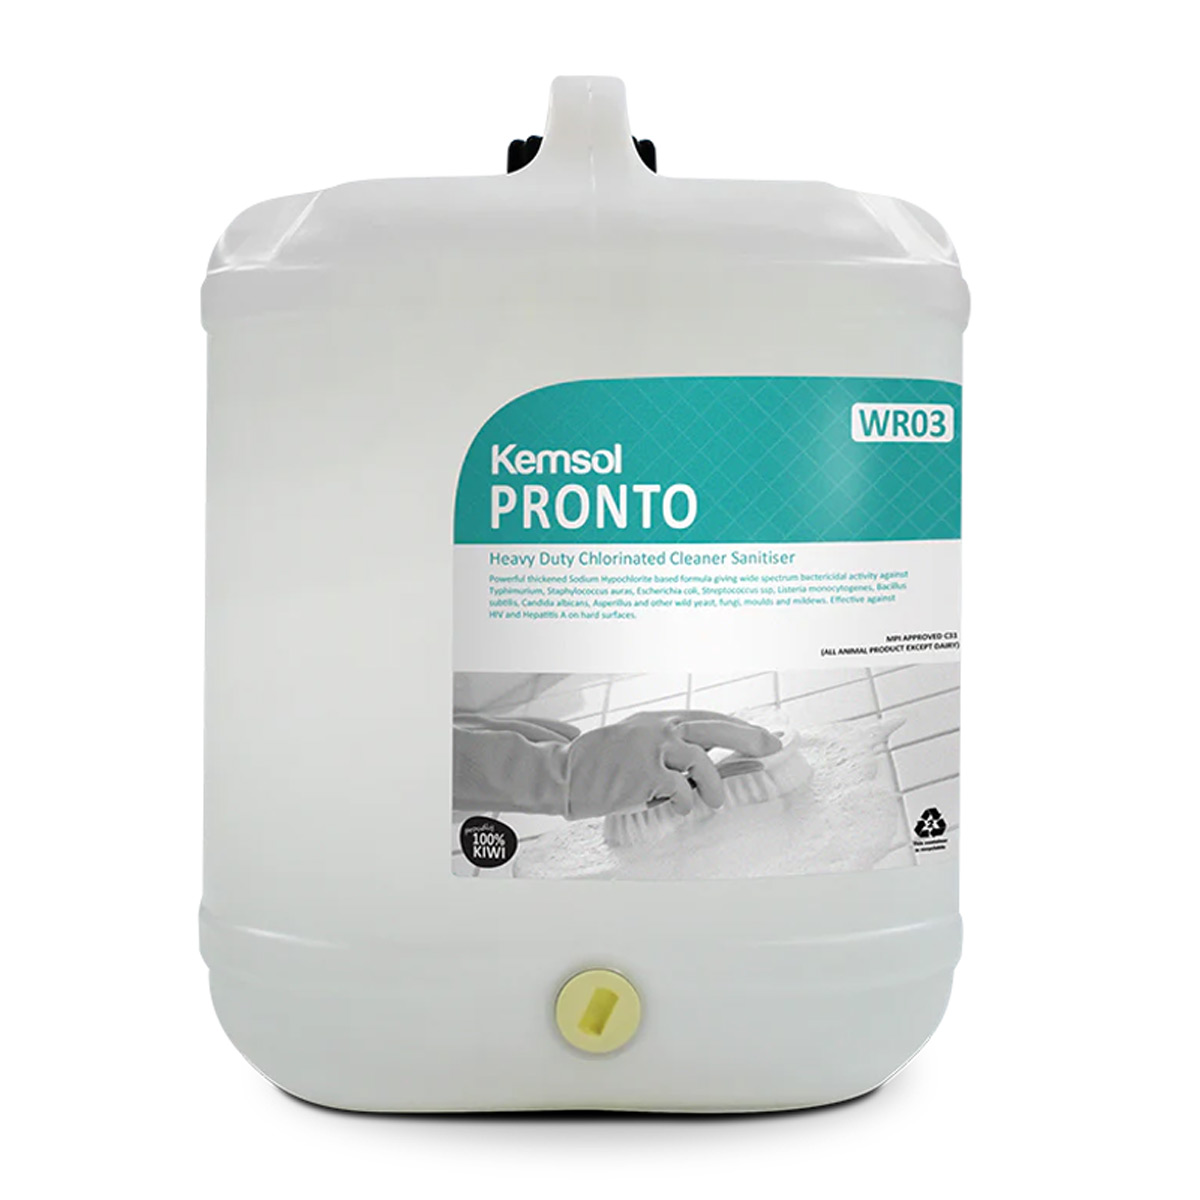 cleaning-products-industrial-specalist-pronto-germicidal-cleaner-20L-litre-heavy-duty-chlorinated-cleaner-sanitiser-powerful-thickened-sodium-hypochlorite-vjs-distributors-hawkes-bay-nz-FK-PRONTO20